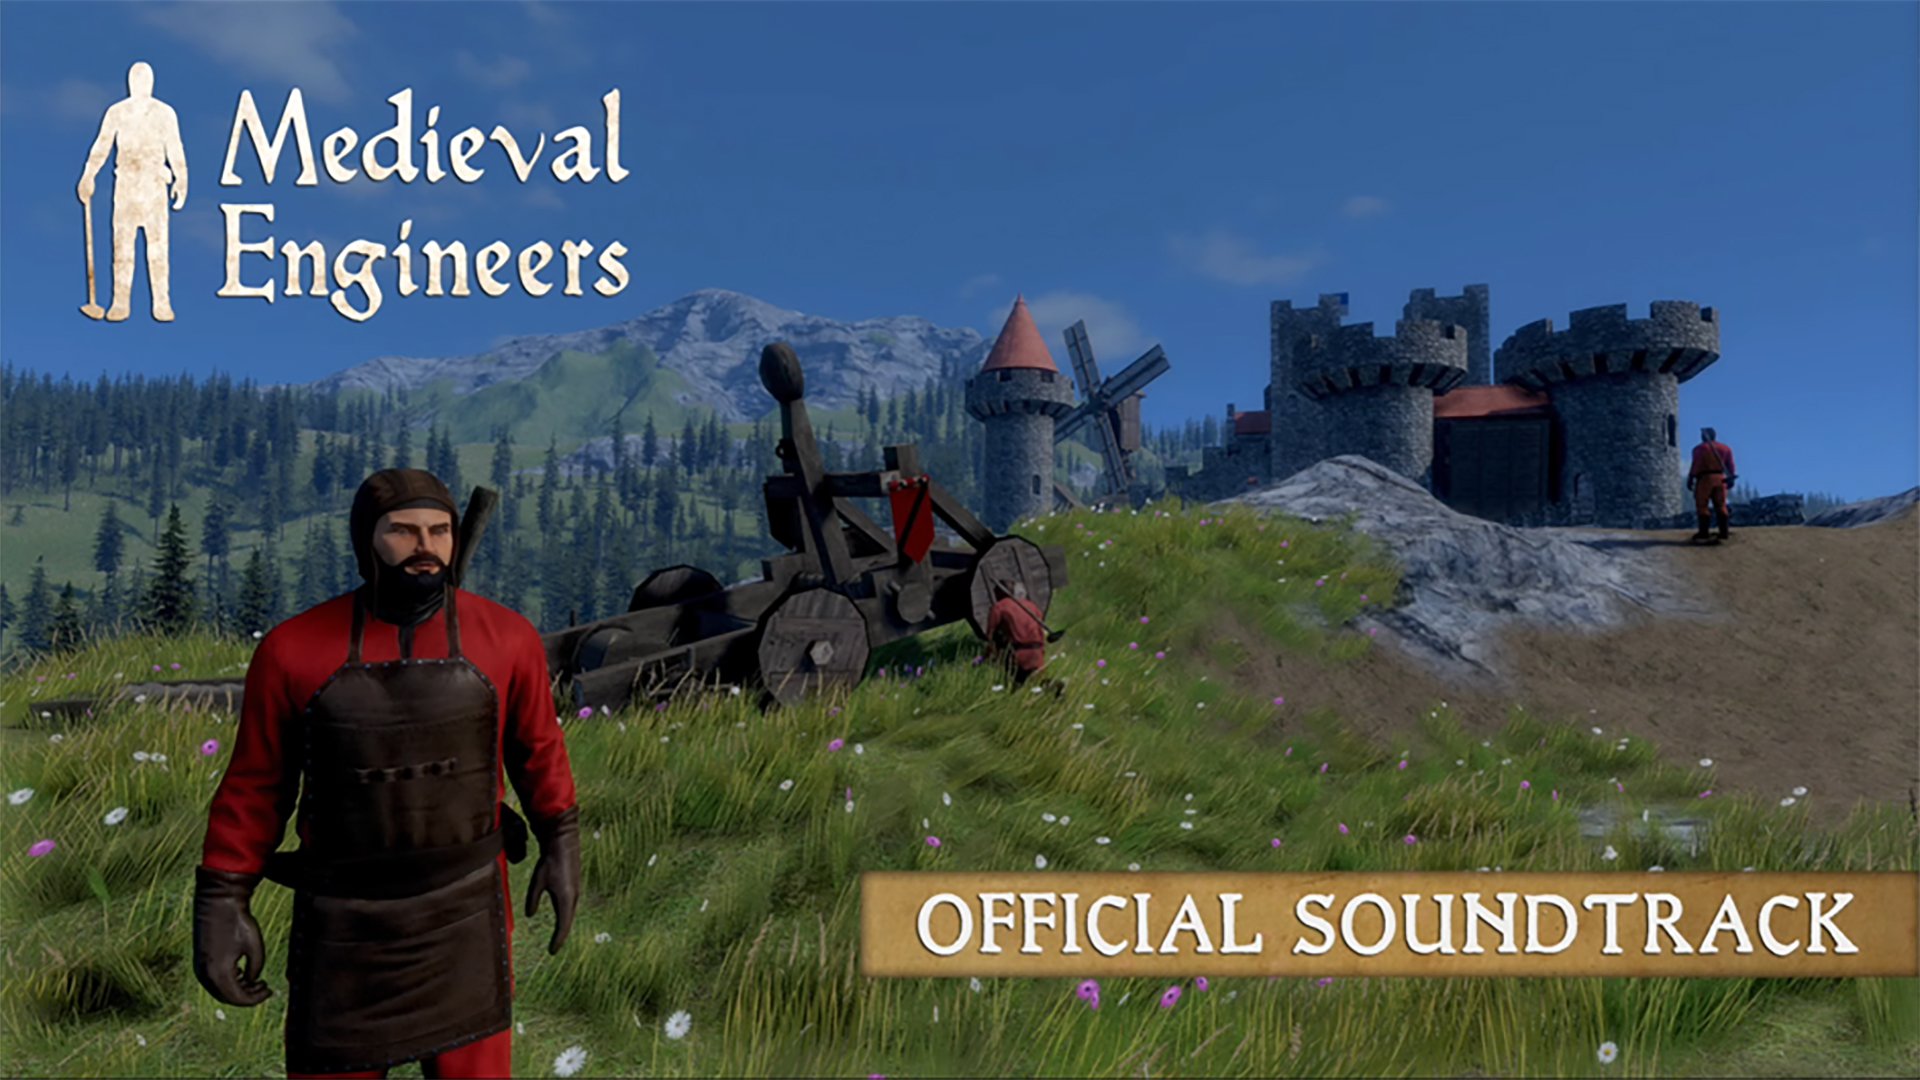 Medieval Engineers Deluxe Edition 1